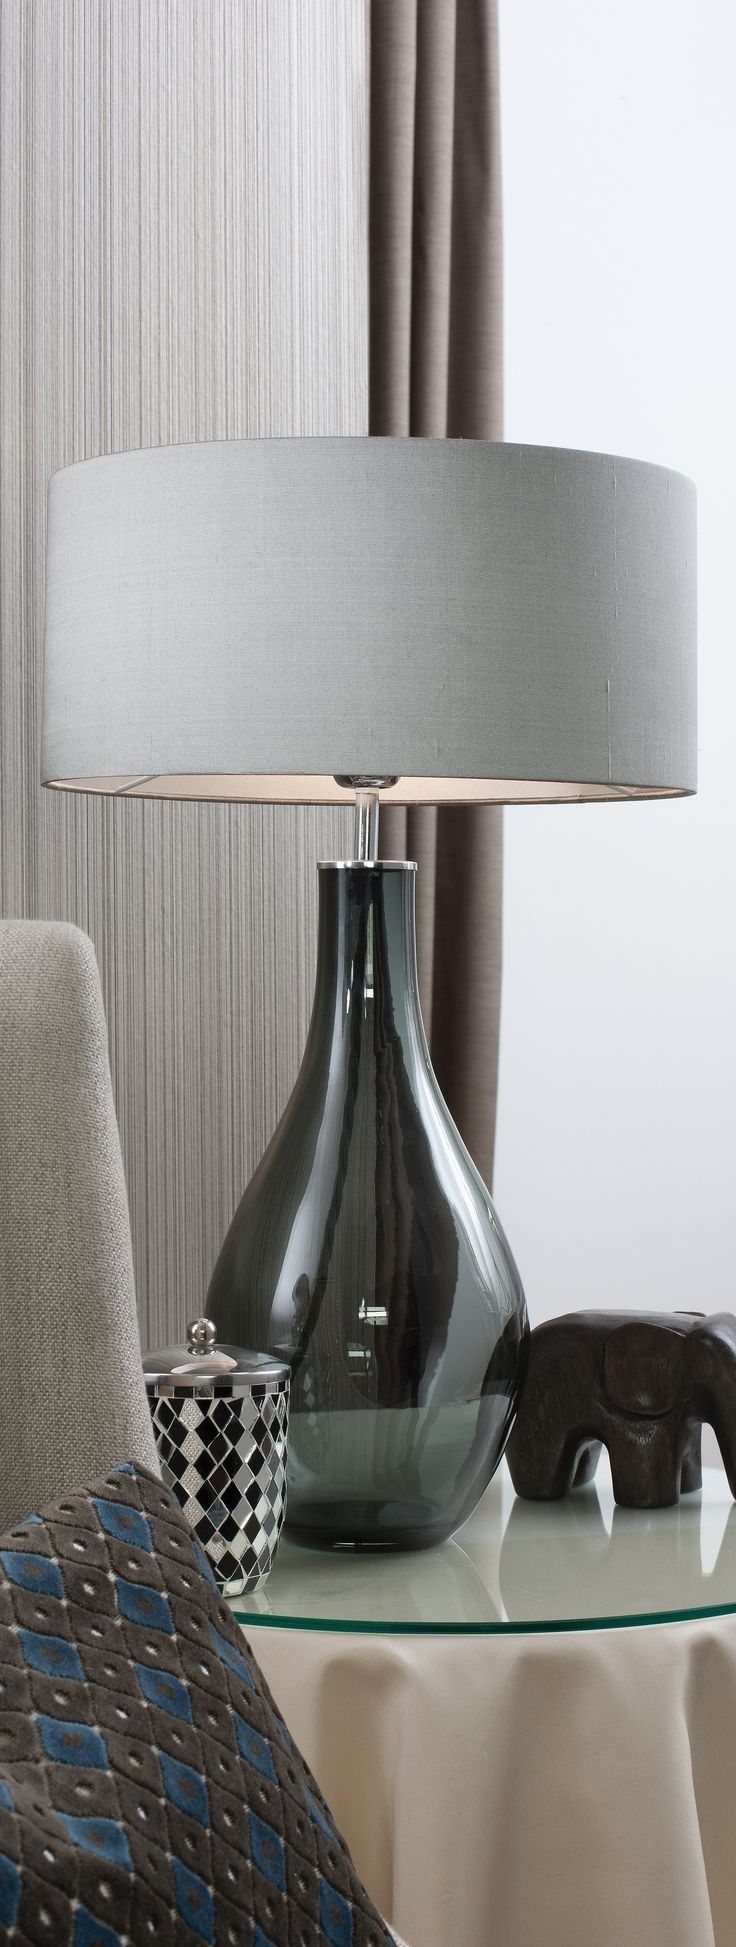 121 Best 台灯 Images On Pinterest | Table Lamps, Light Table And With Luxury Living Room Table Lamps (Photo 11 of 15)